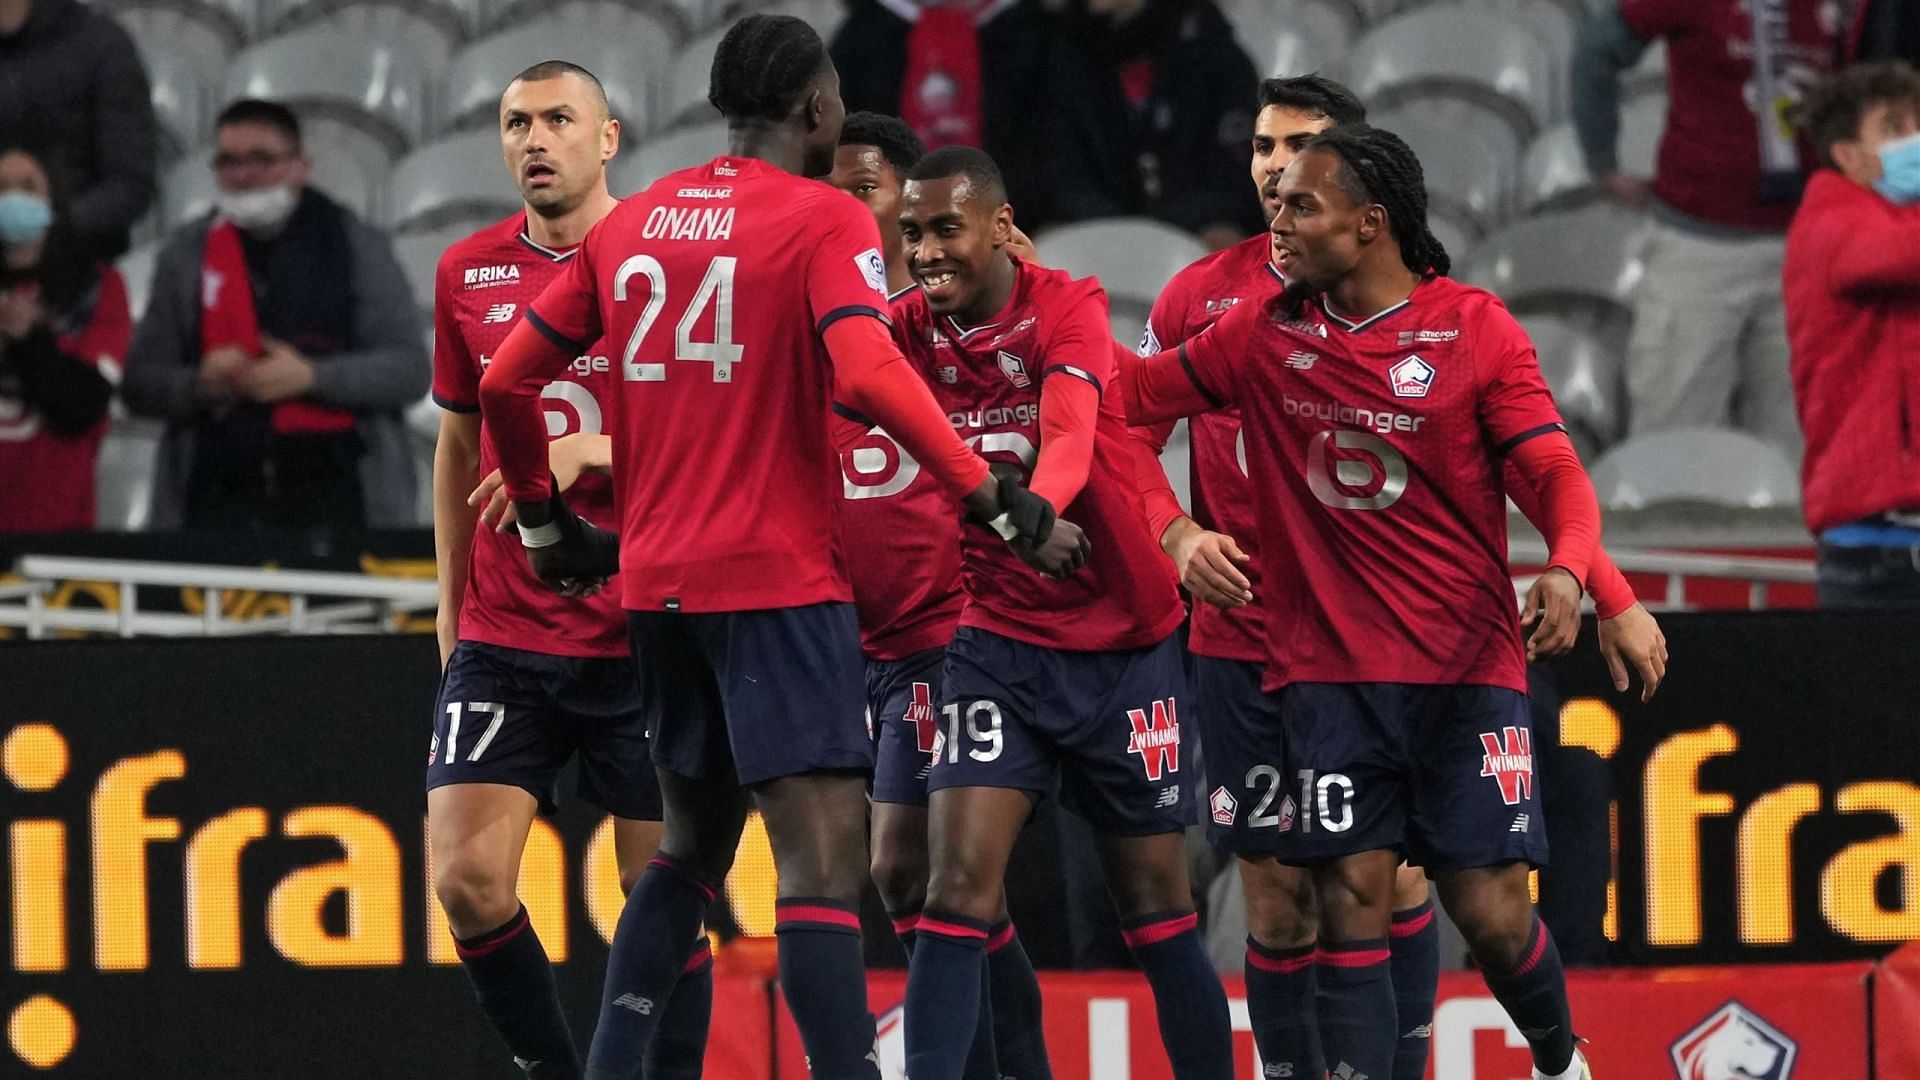 Can champions Lille pick up a win over Brest this weekend?